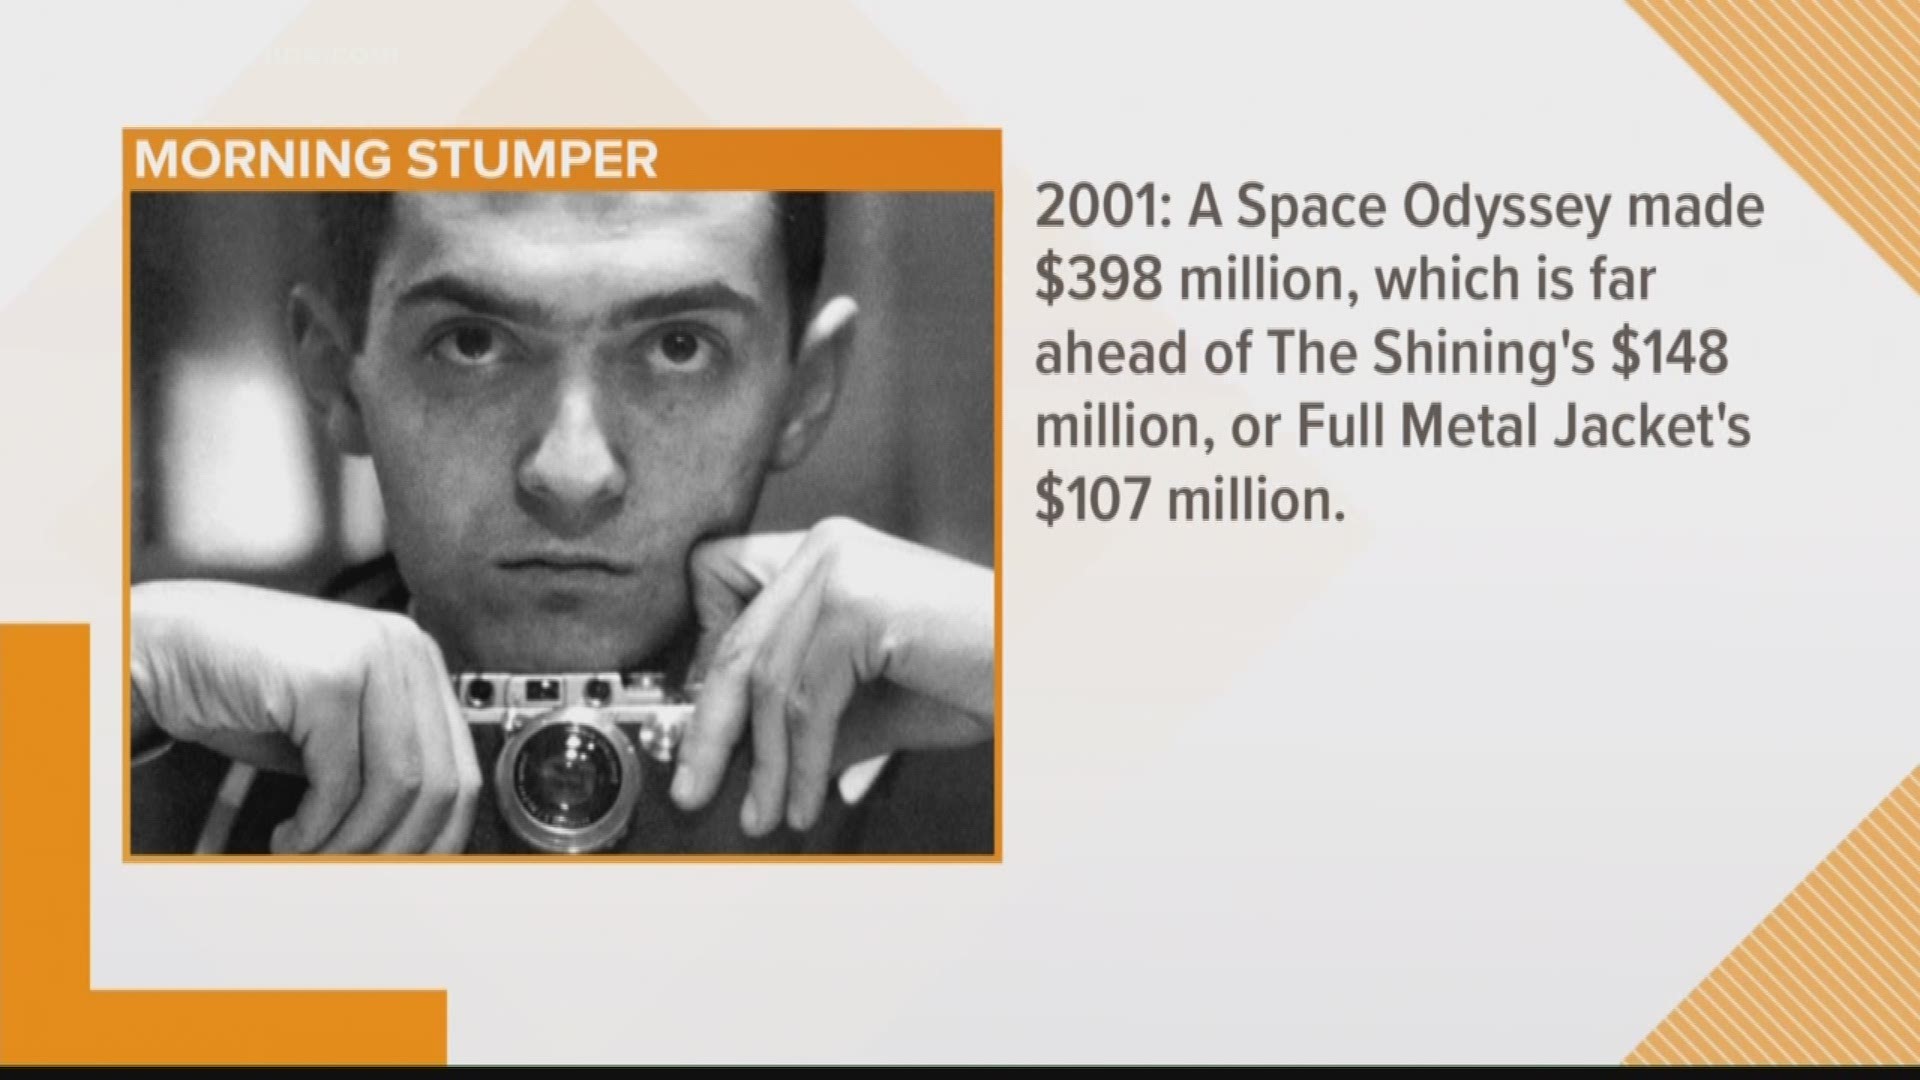 For today's stumper we asked: Out of these three Stanley Kubrick movies, which one do you think made the most money at the box office, when adjusted for inflation?